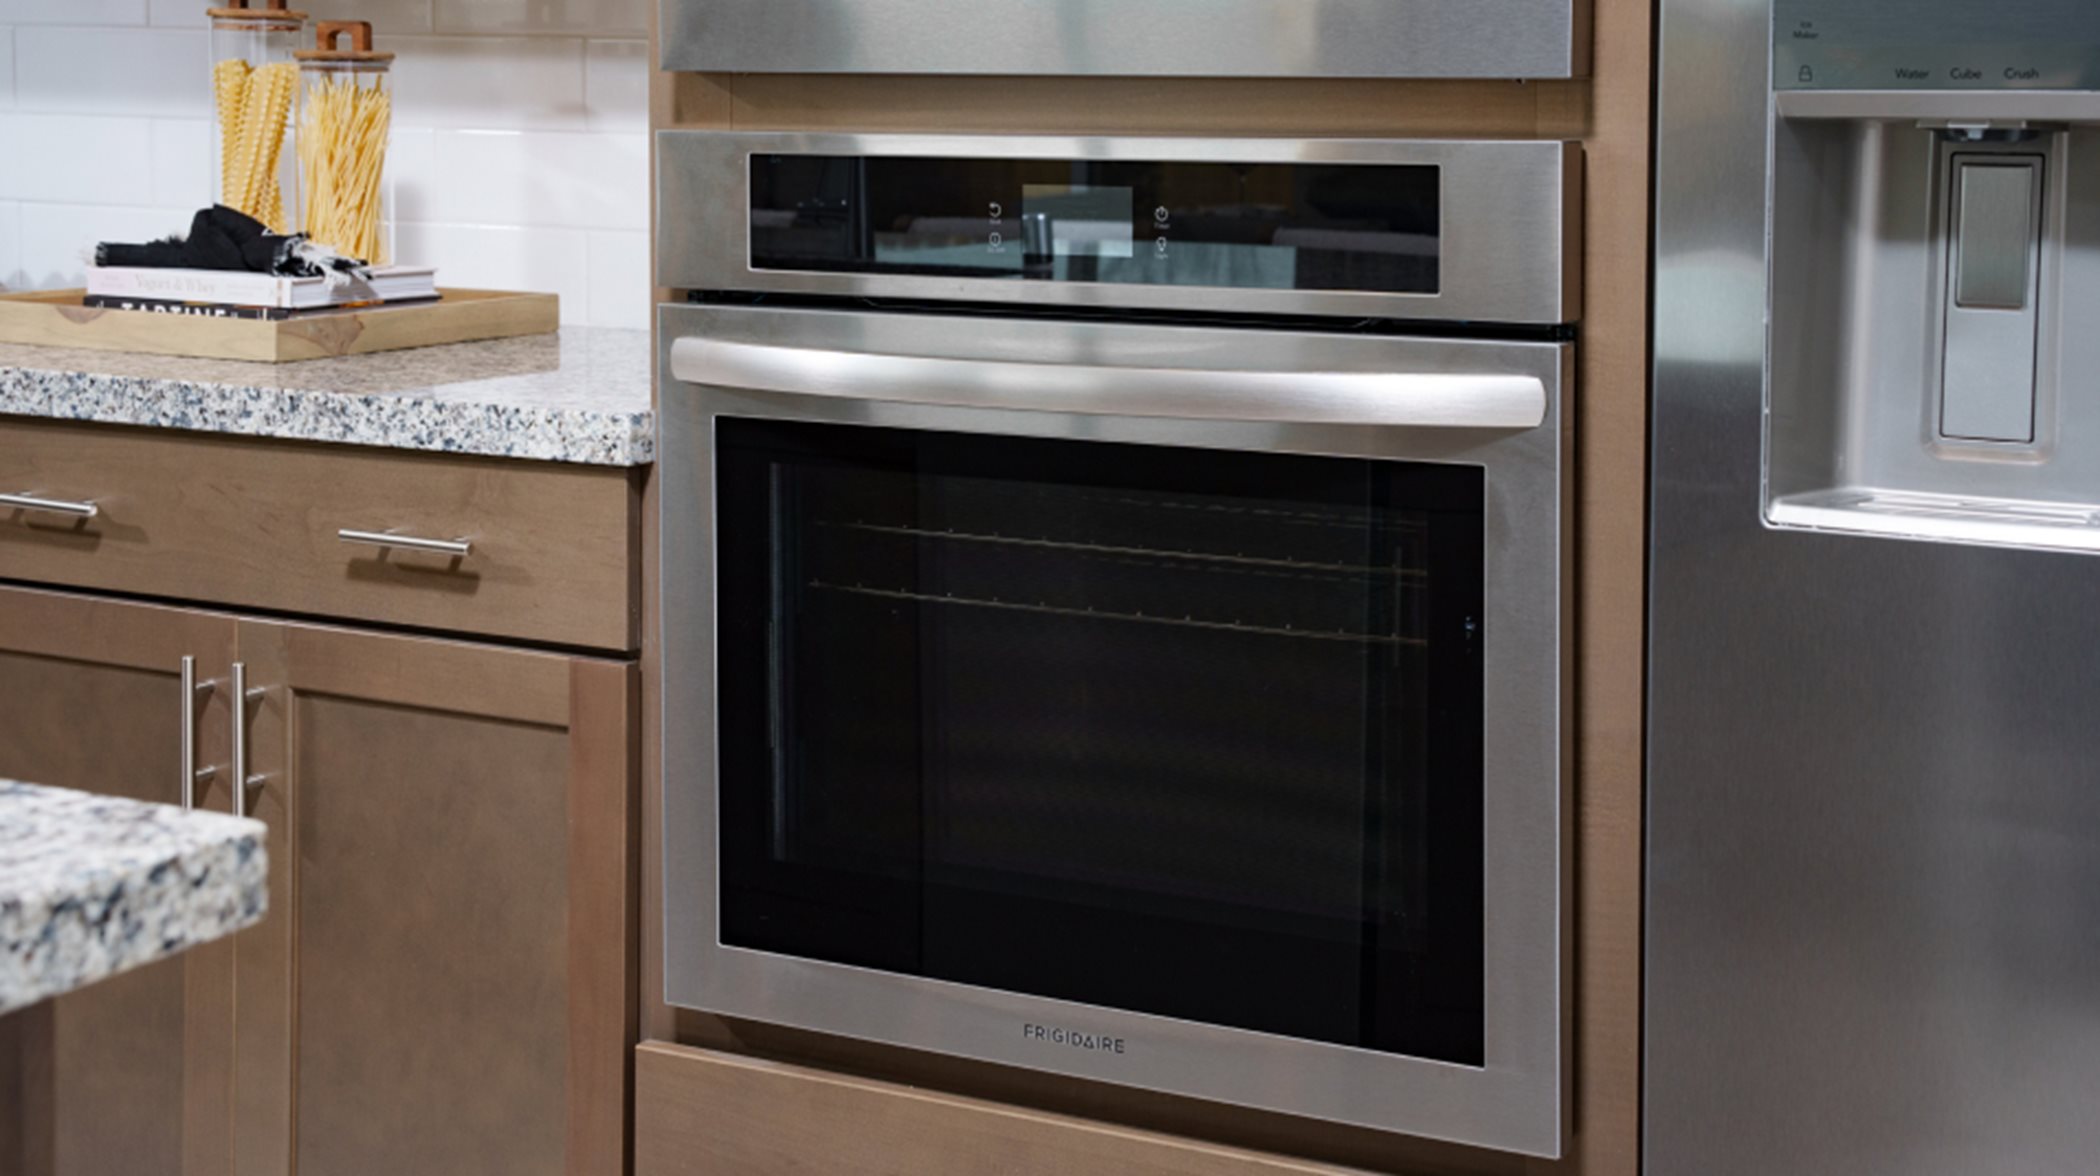 In-wall oven